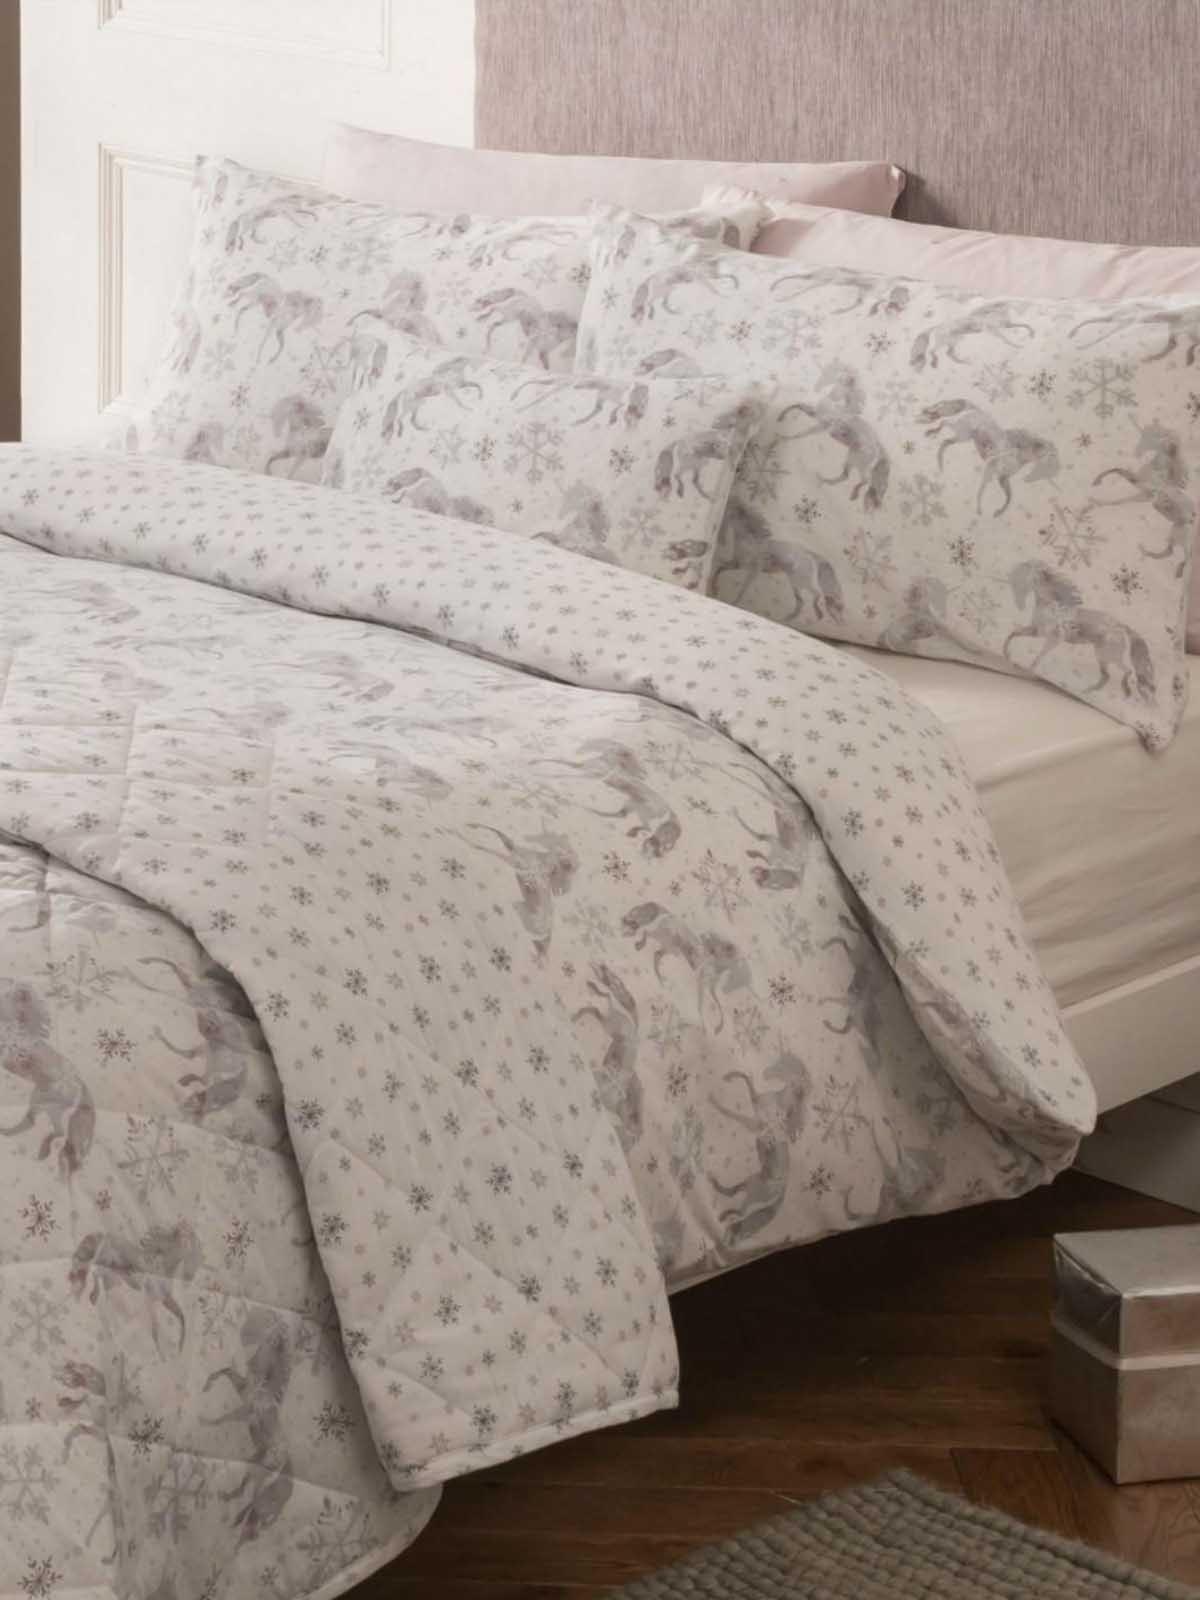 Magical Unicorn Bedding Collection Pink Ponden Home